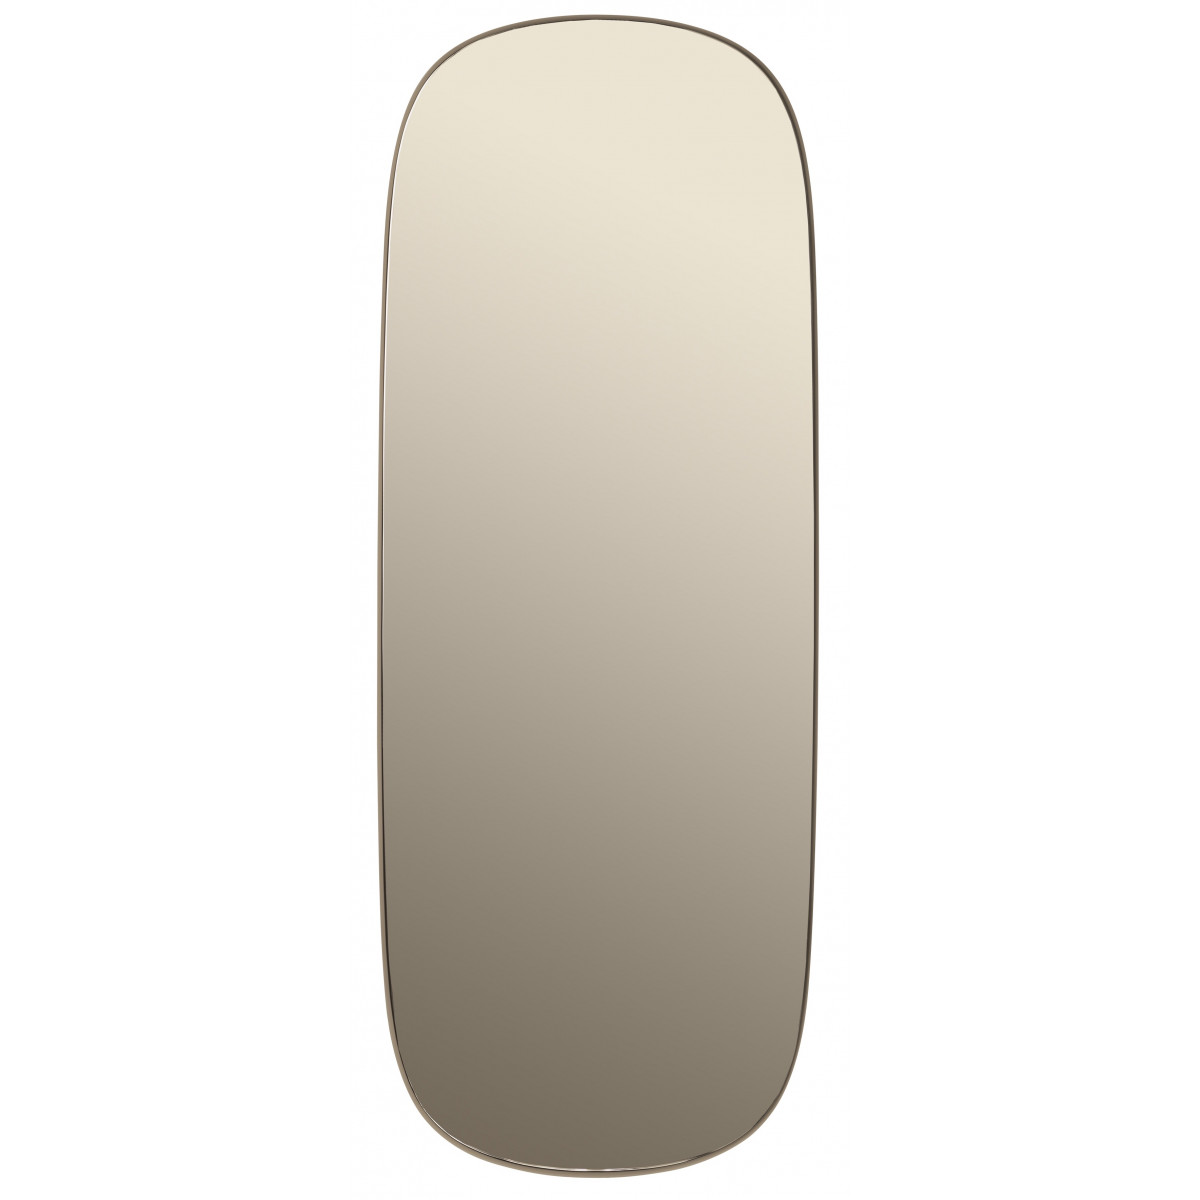 Taupe / Taupe, large - Framed Mirror